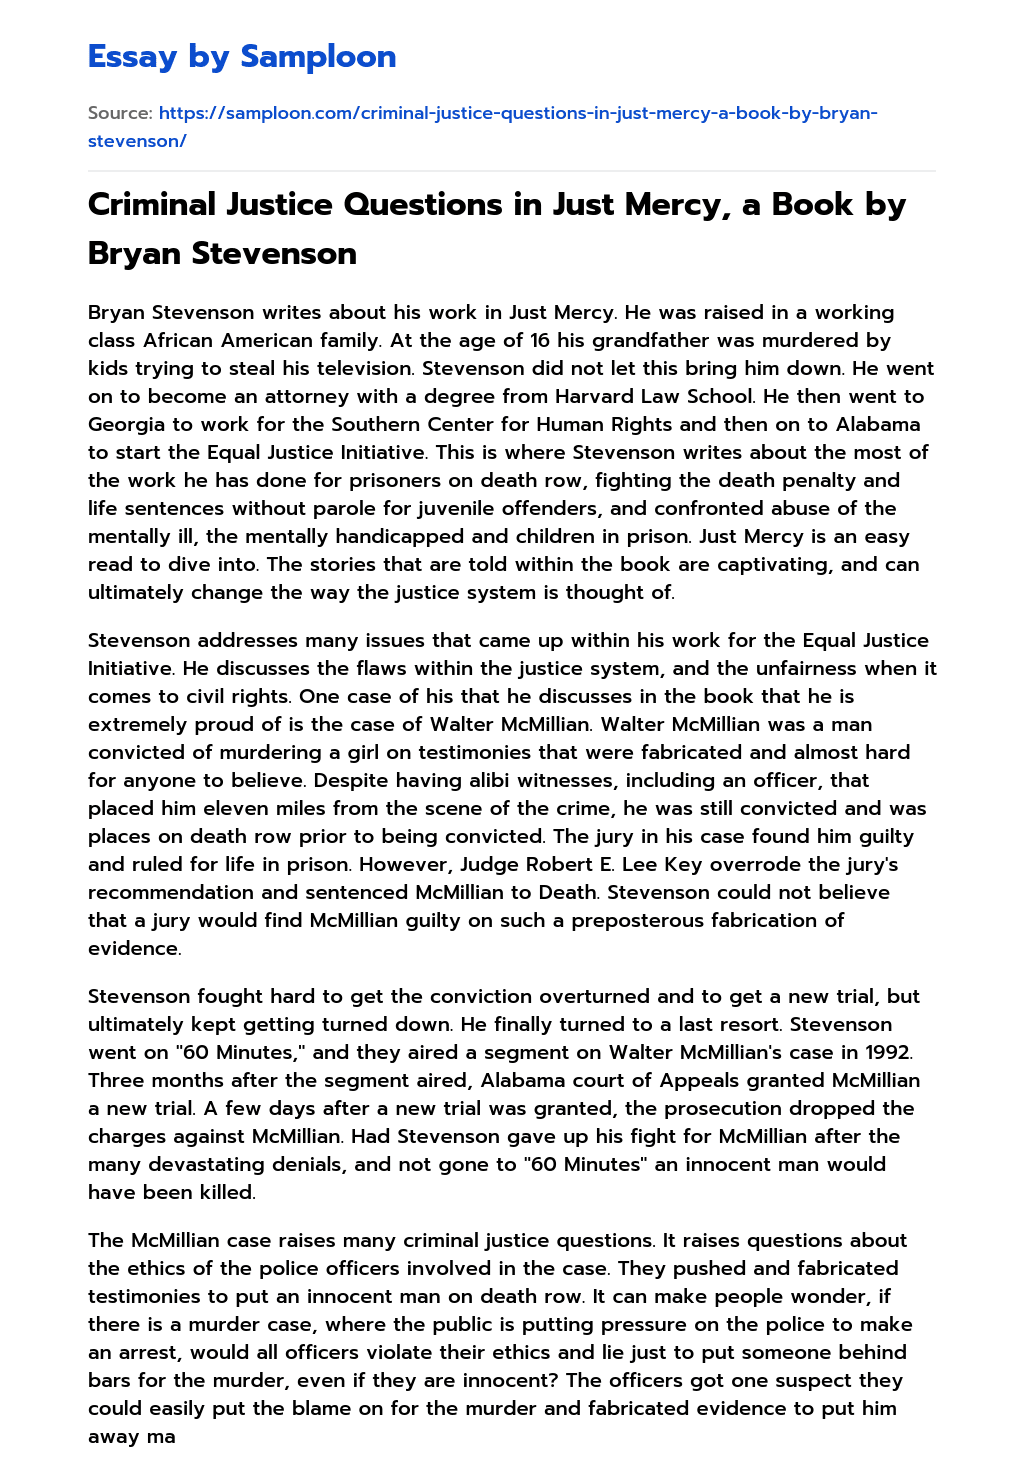 Criminal Justice Questions in Just Mercy, a Book by Bryan Stevenson essay